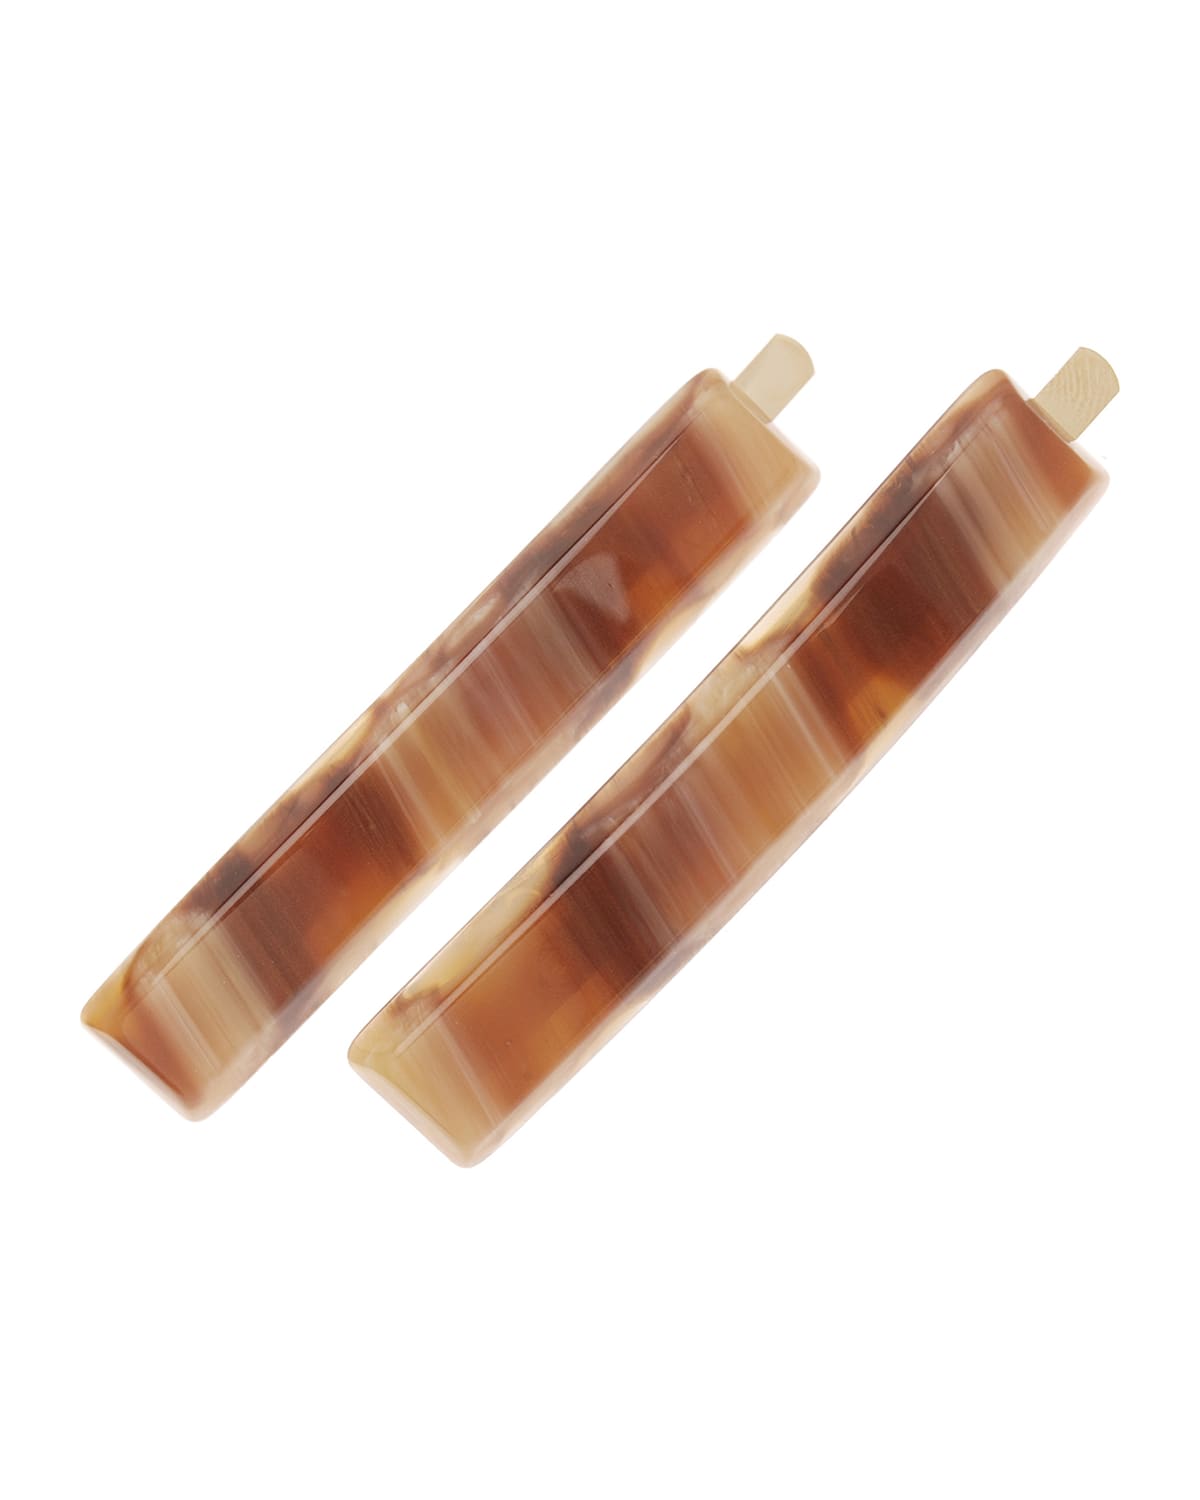 France Luxe Mod Bobby Pins, Set Of 2 In Caramel Horn